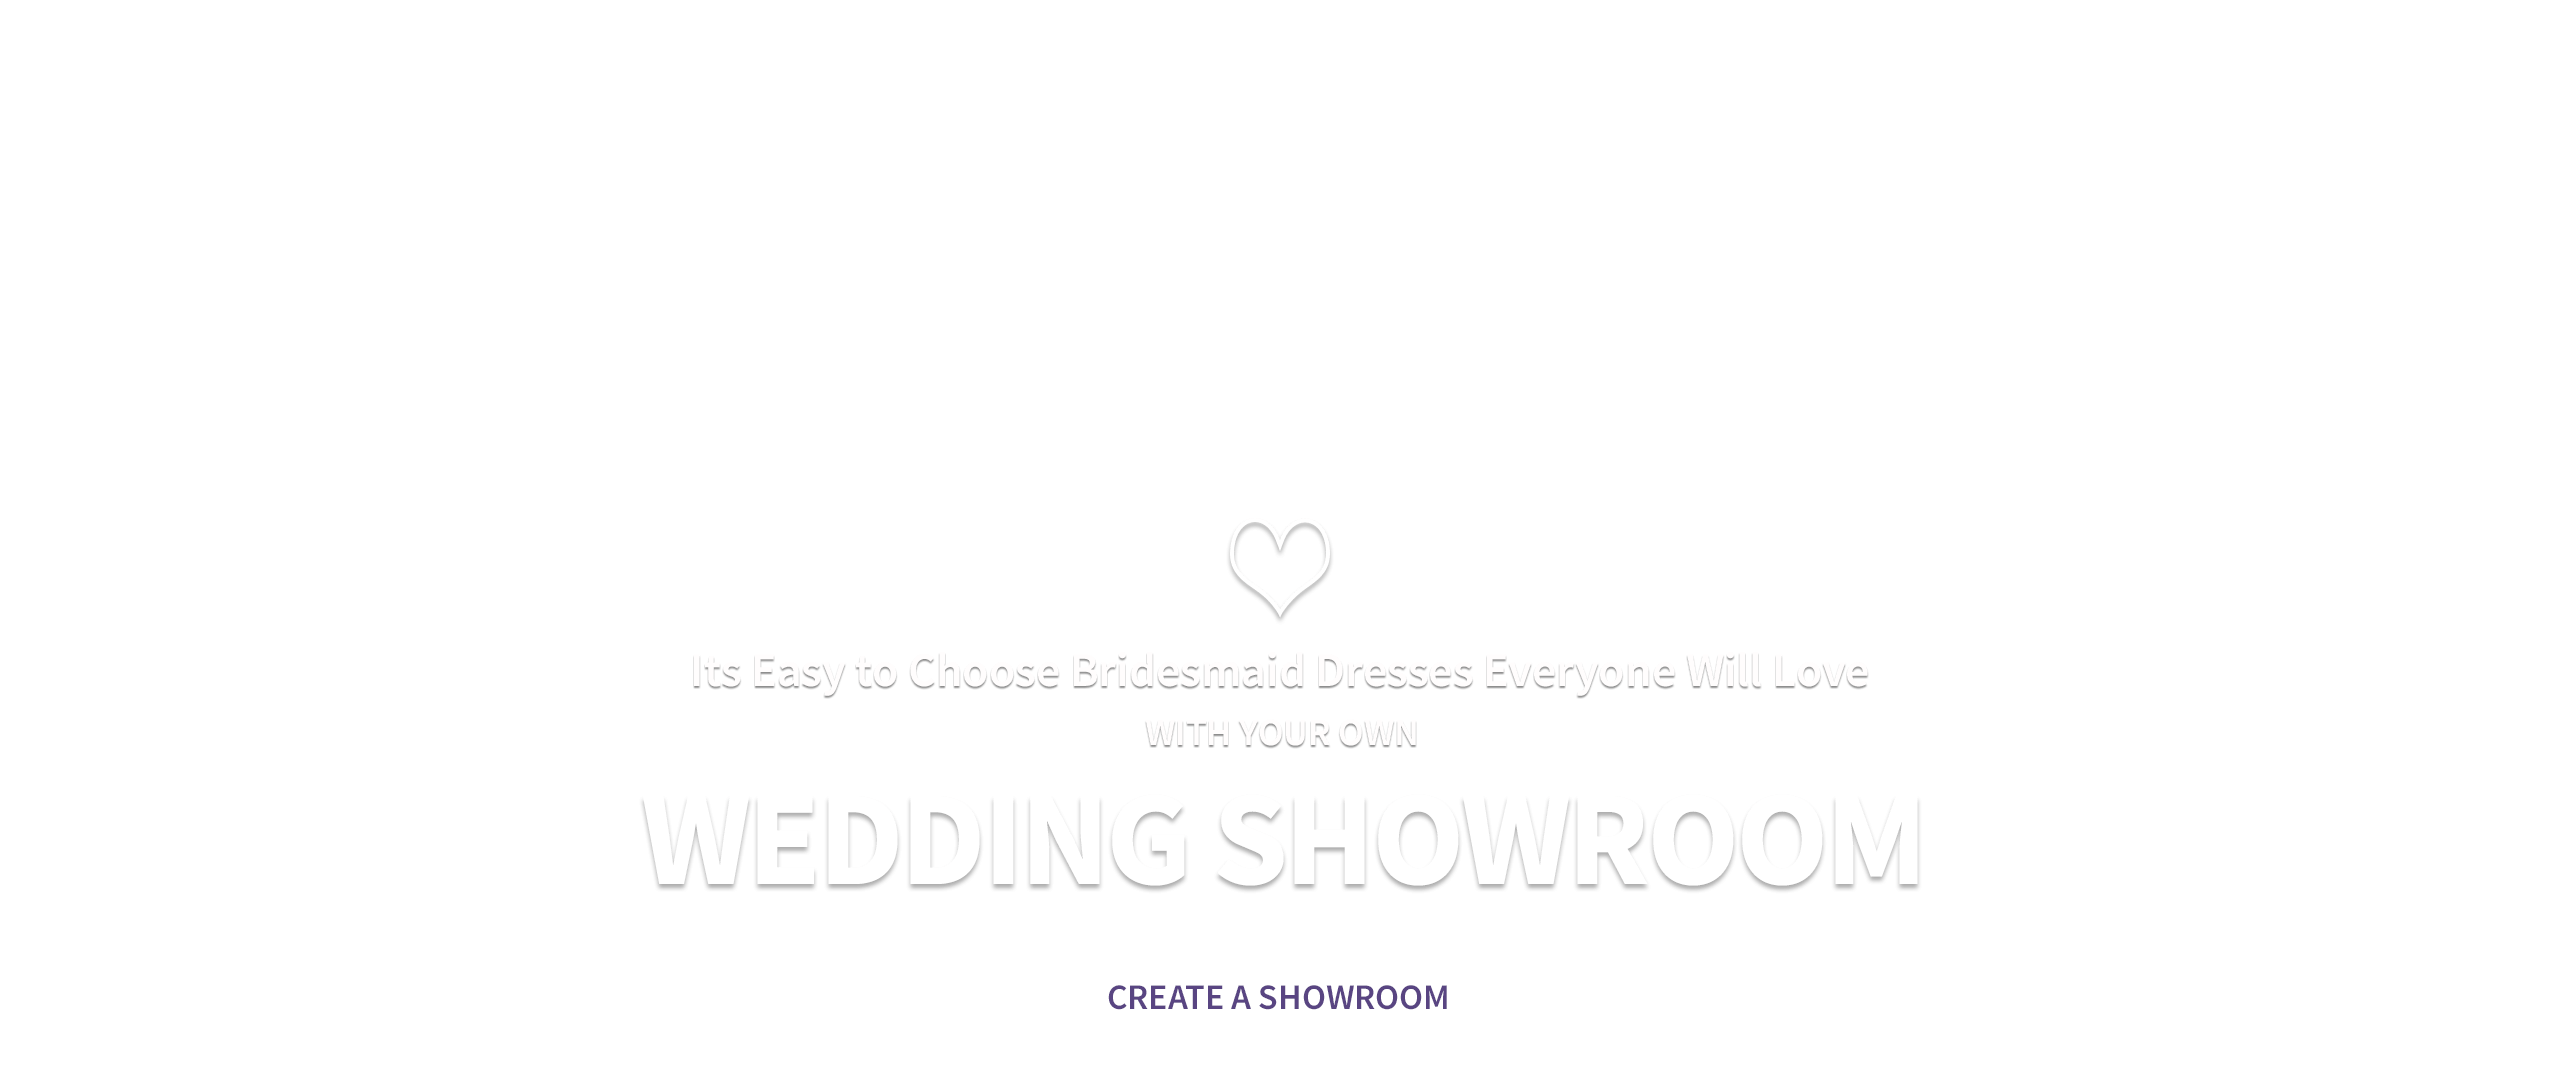 Collaborate on a Look You'll All Love with Your Own Wedding Showroom